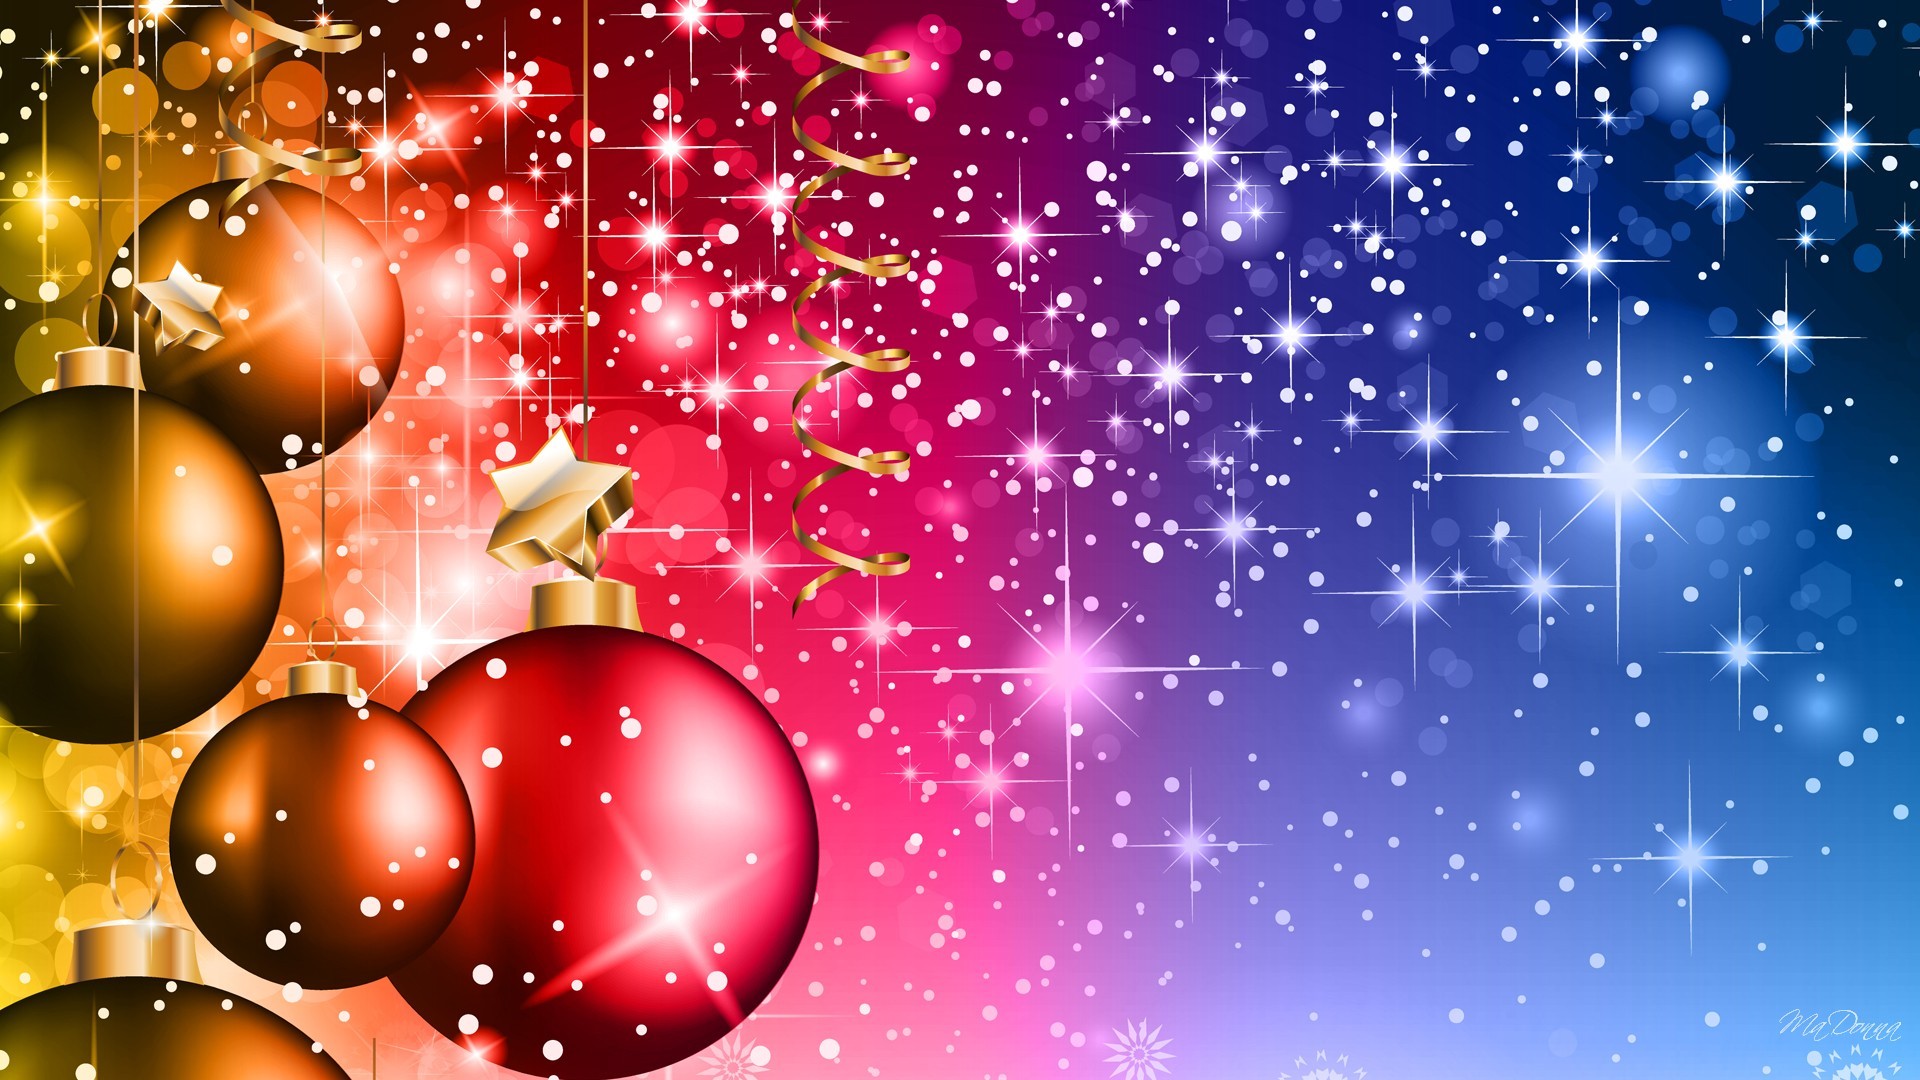 Colorful Christmas Background Hd - HD Wallpaper 